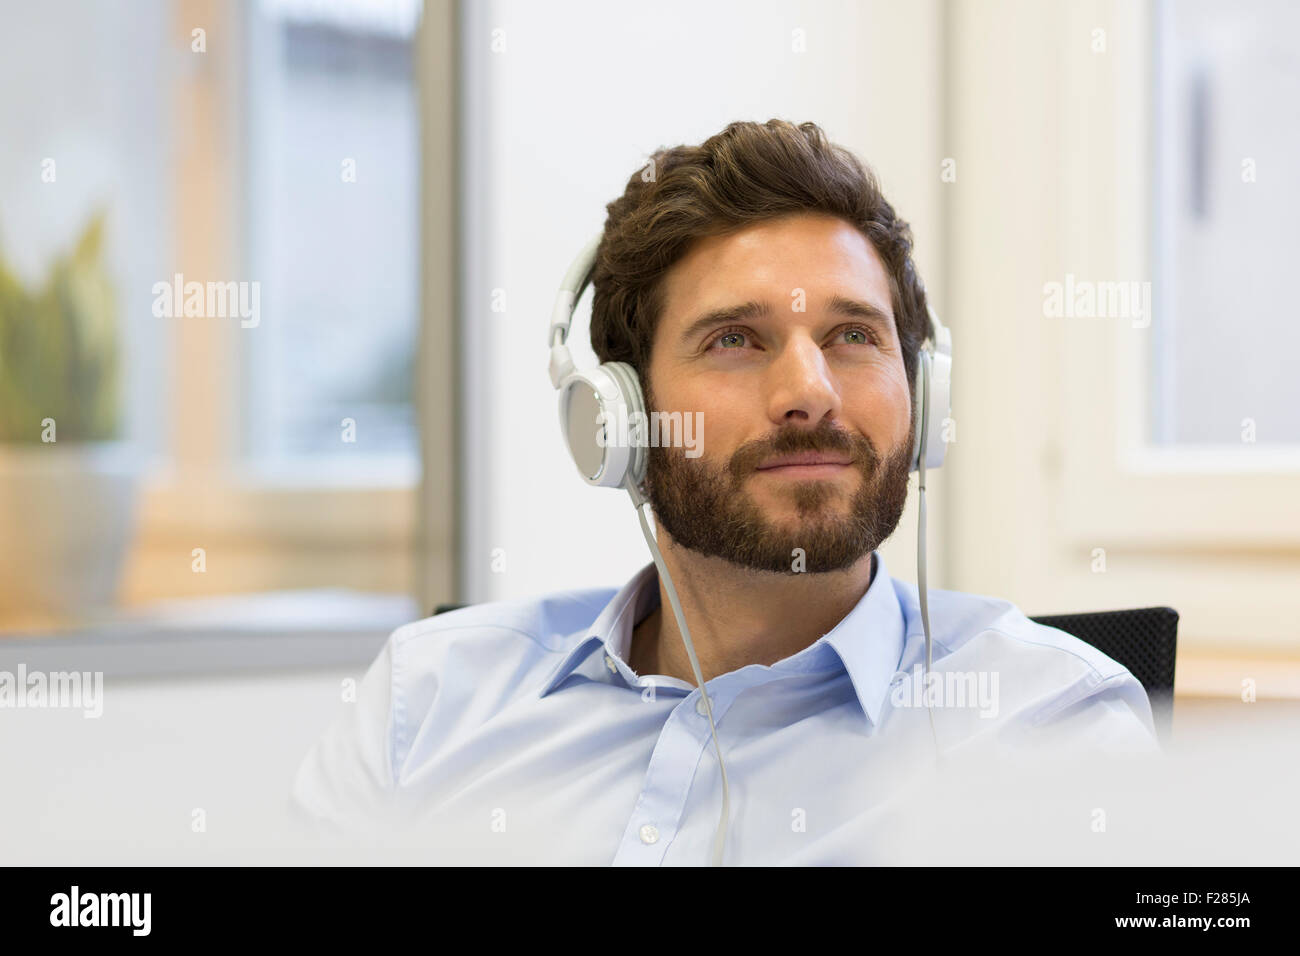 Pensive businessman listening to music with headphones Stock Photo